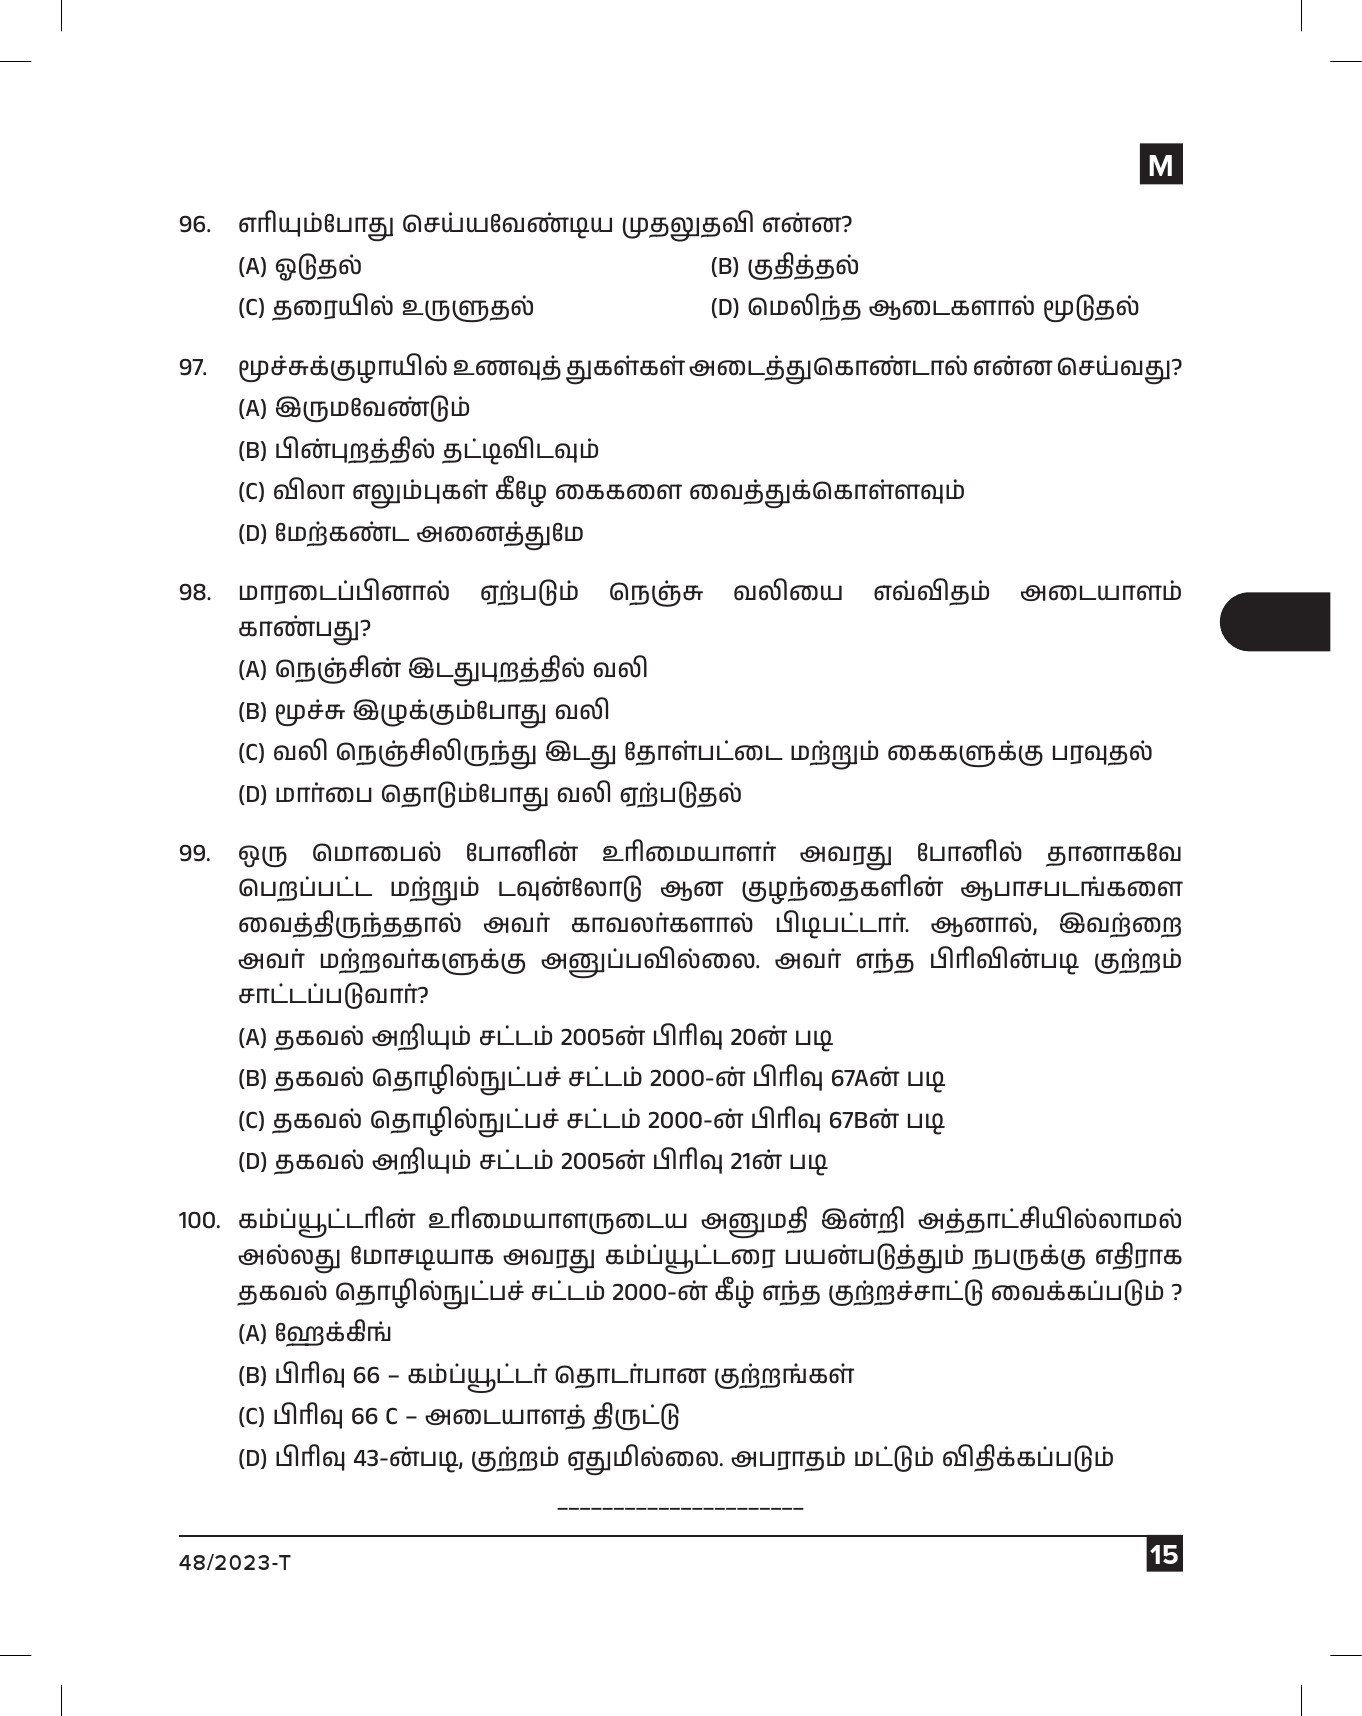 KPSC Fire and Rescue Officer Tamil Exam 2023 Code 0482023 T 14